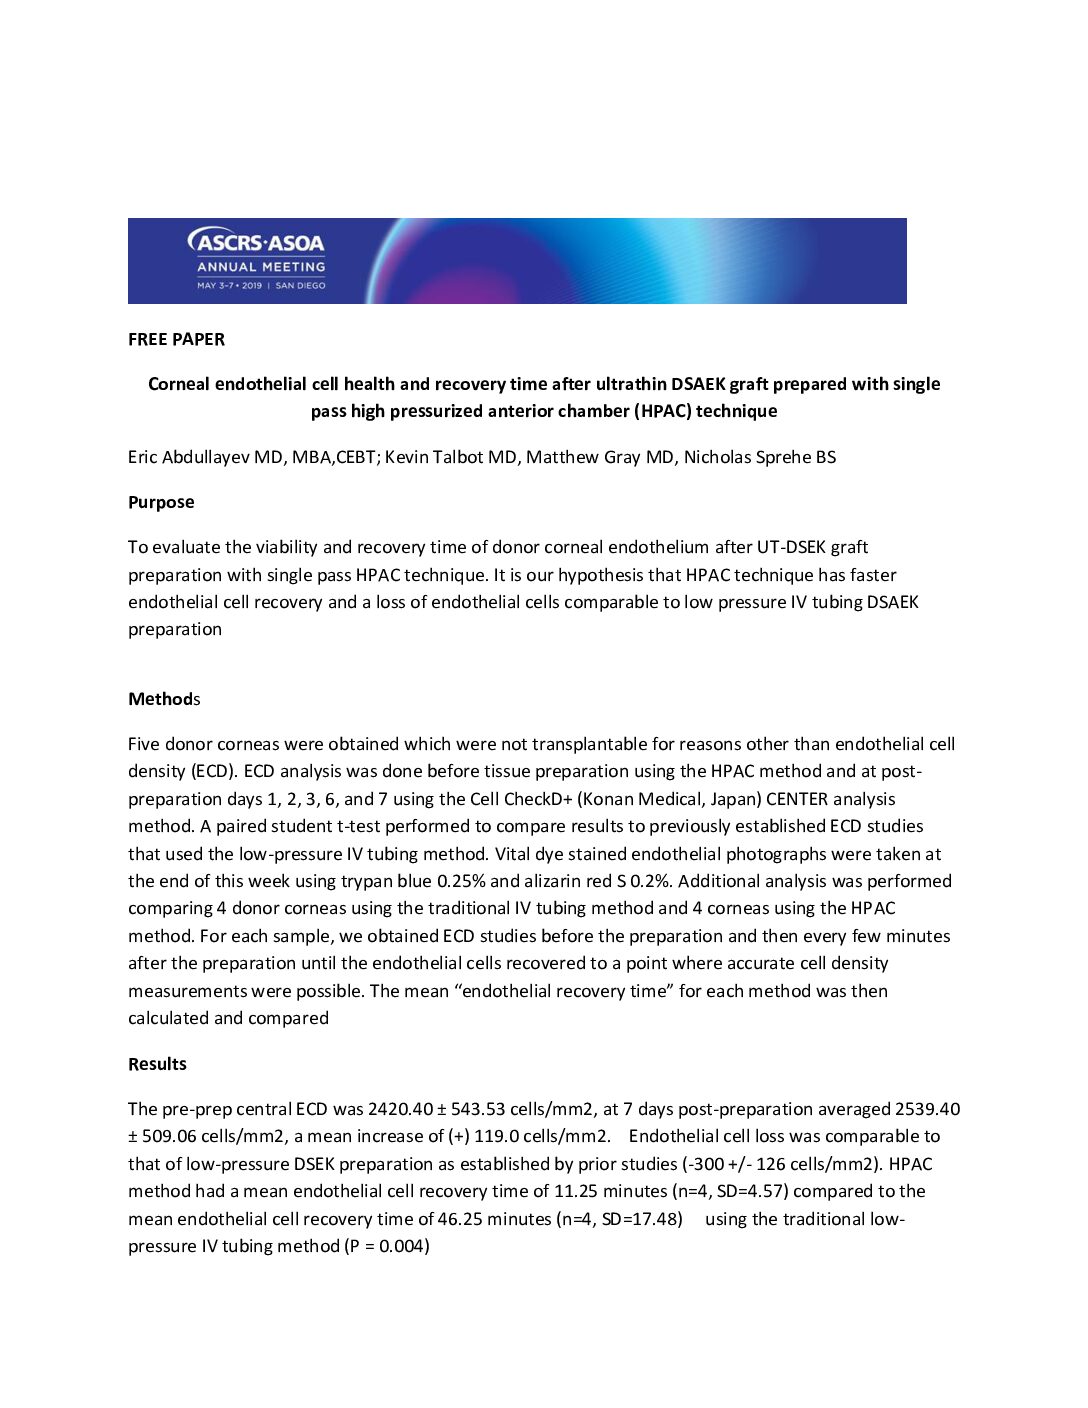 Click to open the 2019 ASCRS: Corneal endothelial cell health and recovery time after ultrathin DSAEK graft prepared with single pass high pressurized anterior chamber (HPAC) technique file